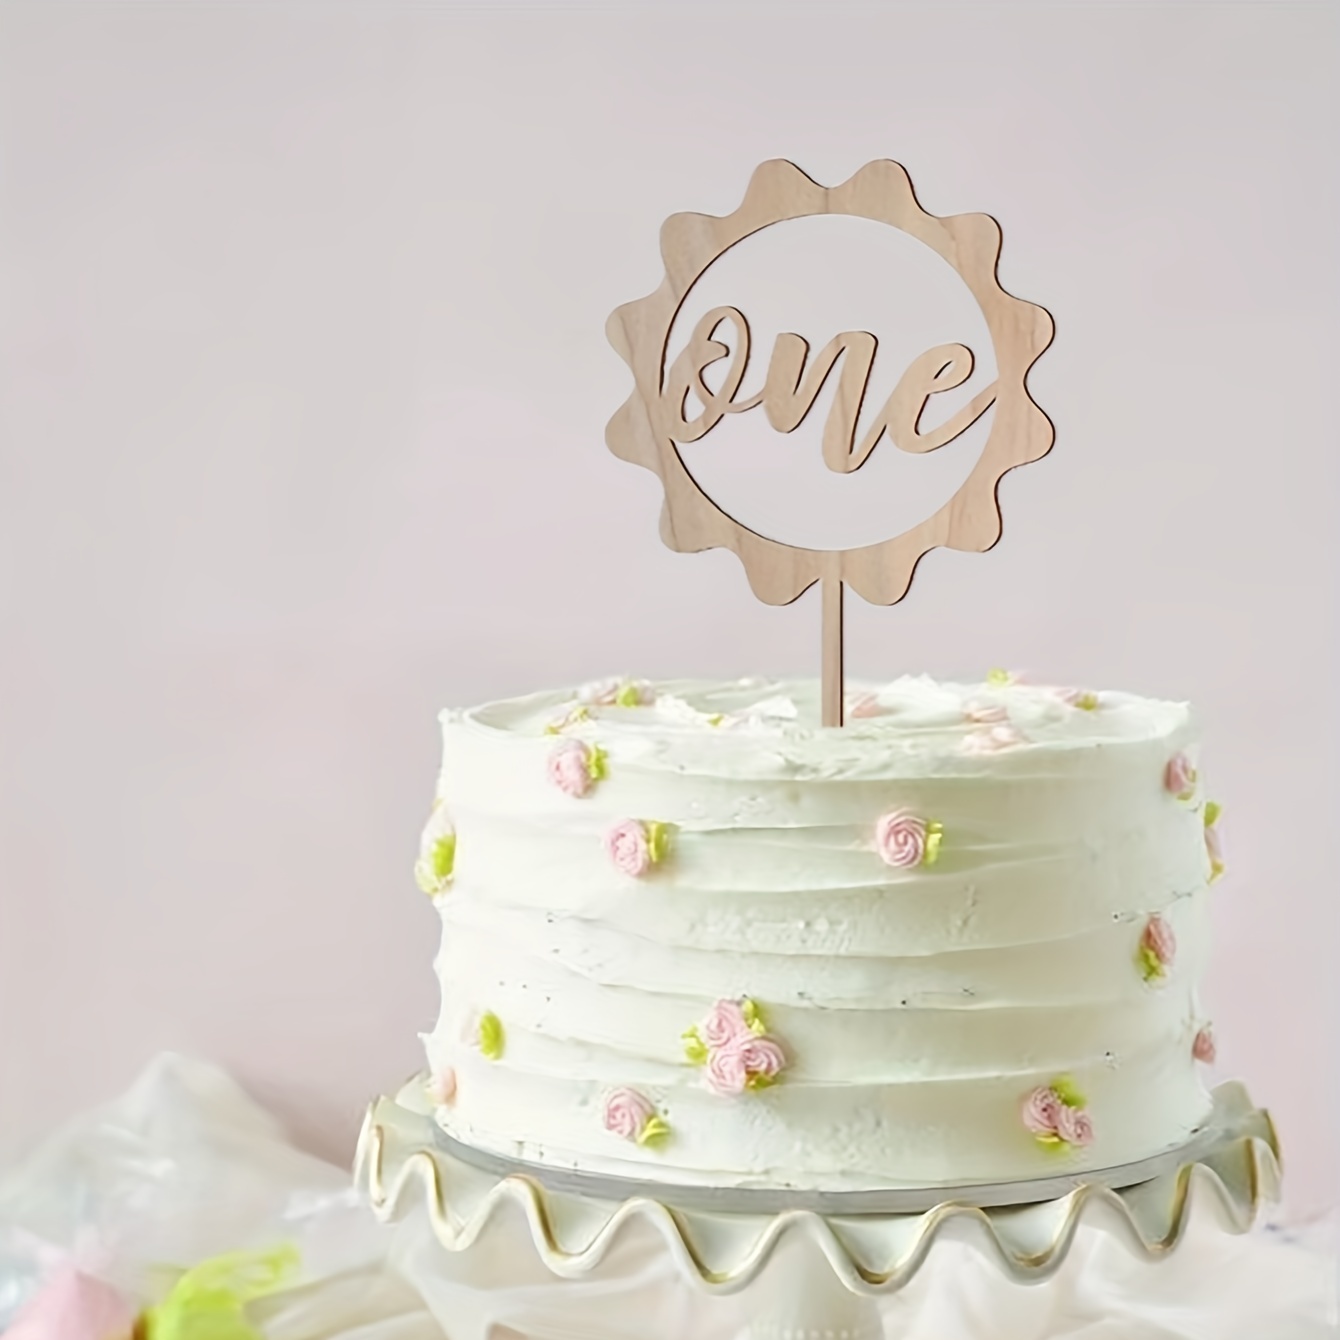 1pc Wooden One Year Old Cake Topper, Cute Creative Cake Decor